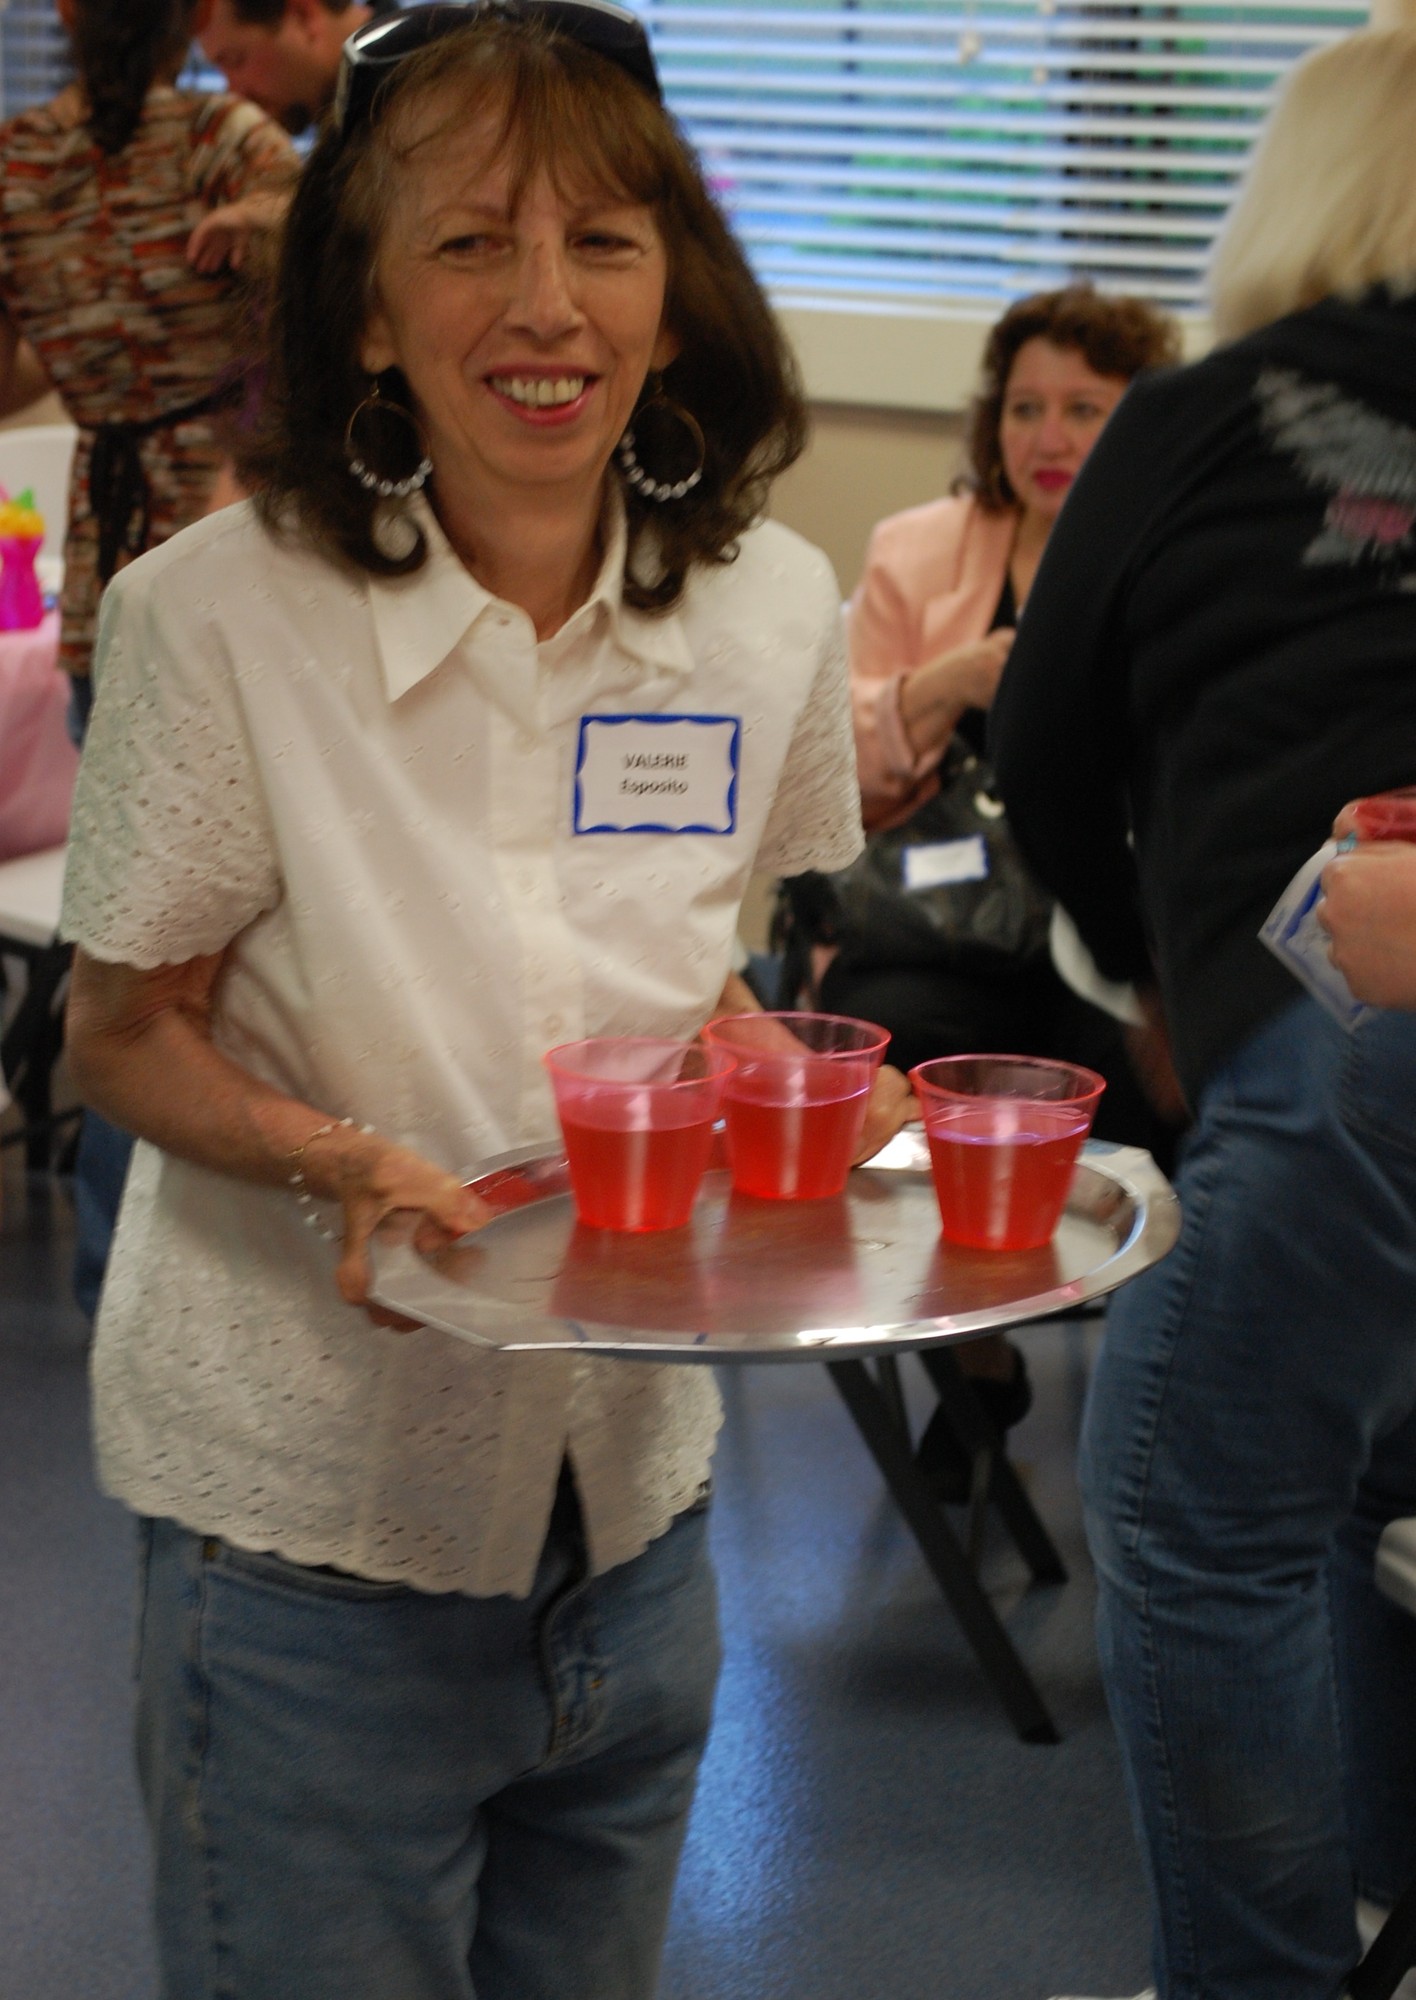 Valerie Esposito served up some of her strawberry punch.